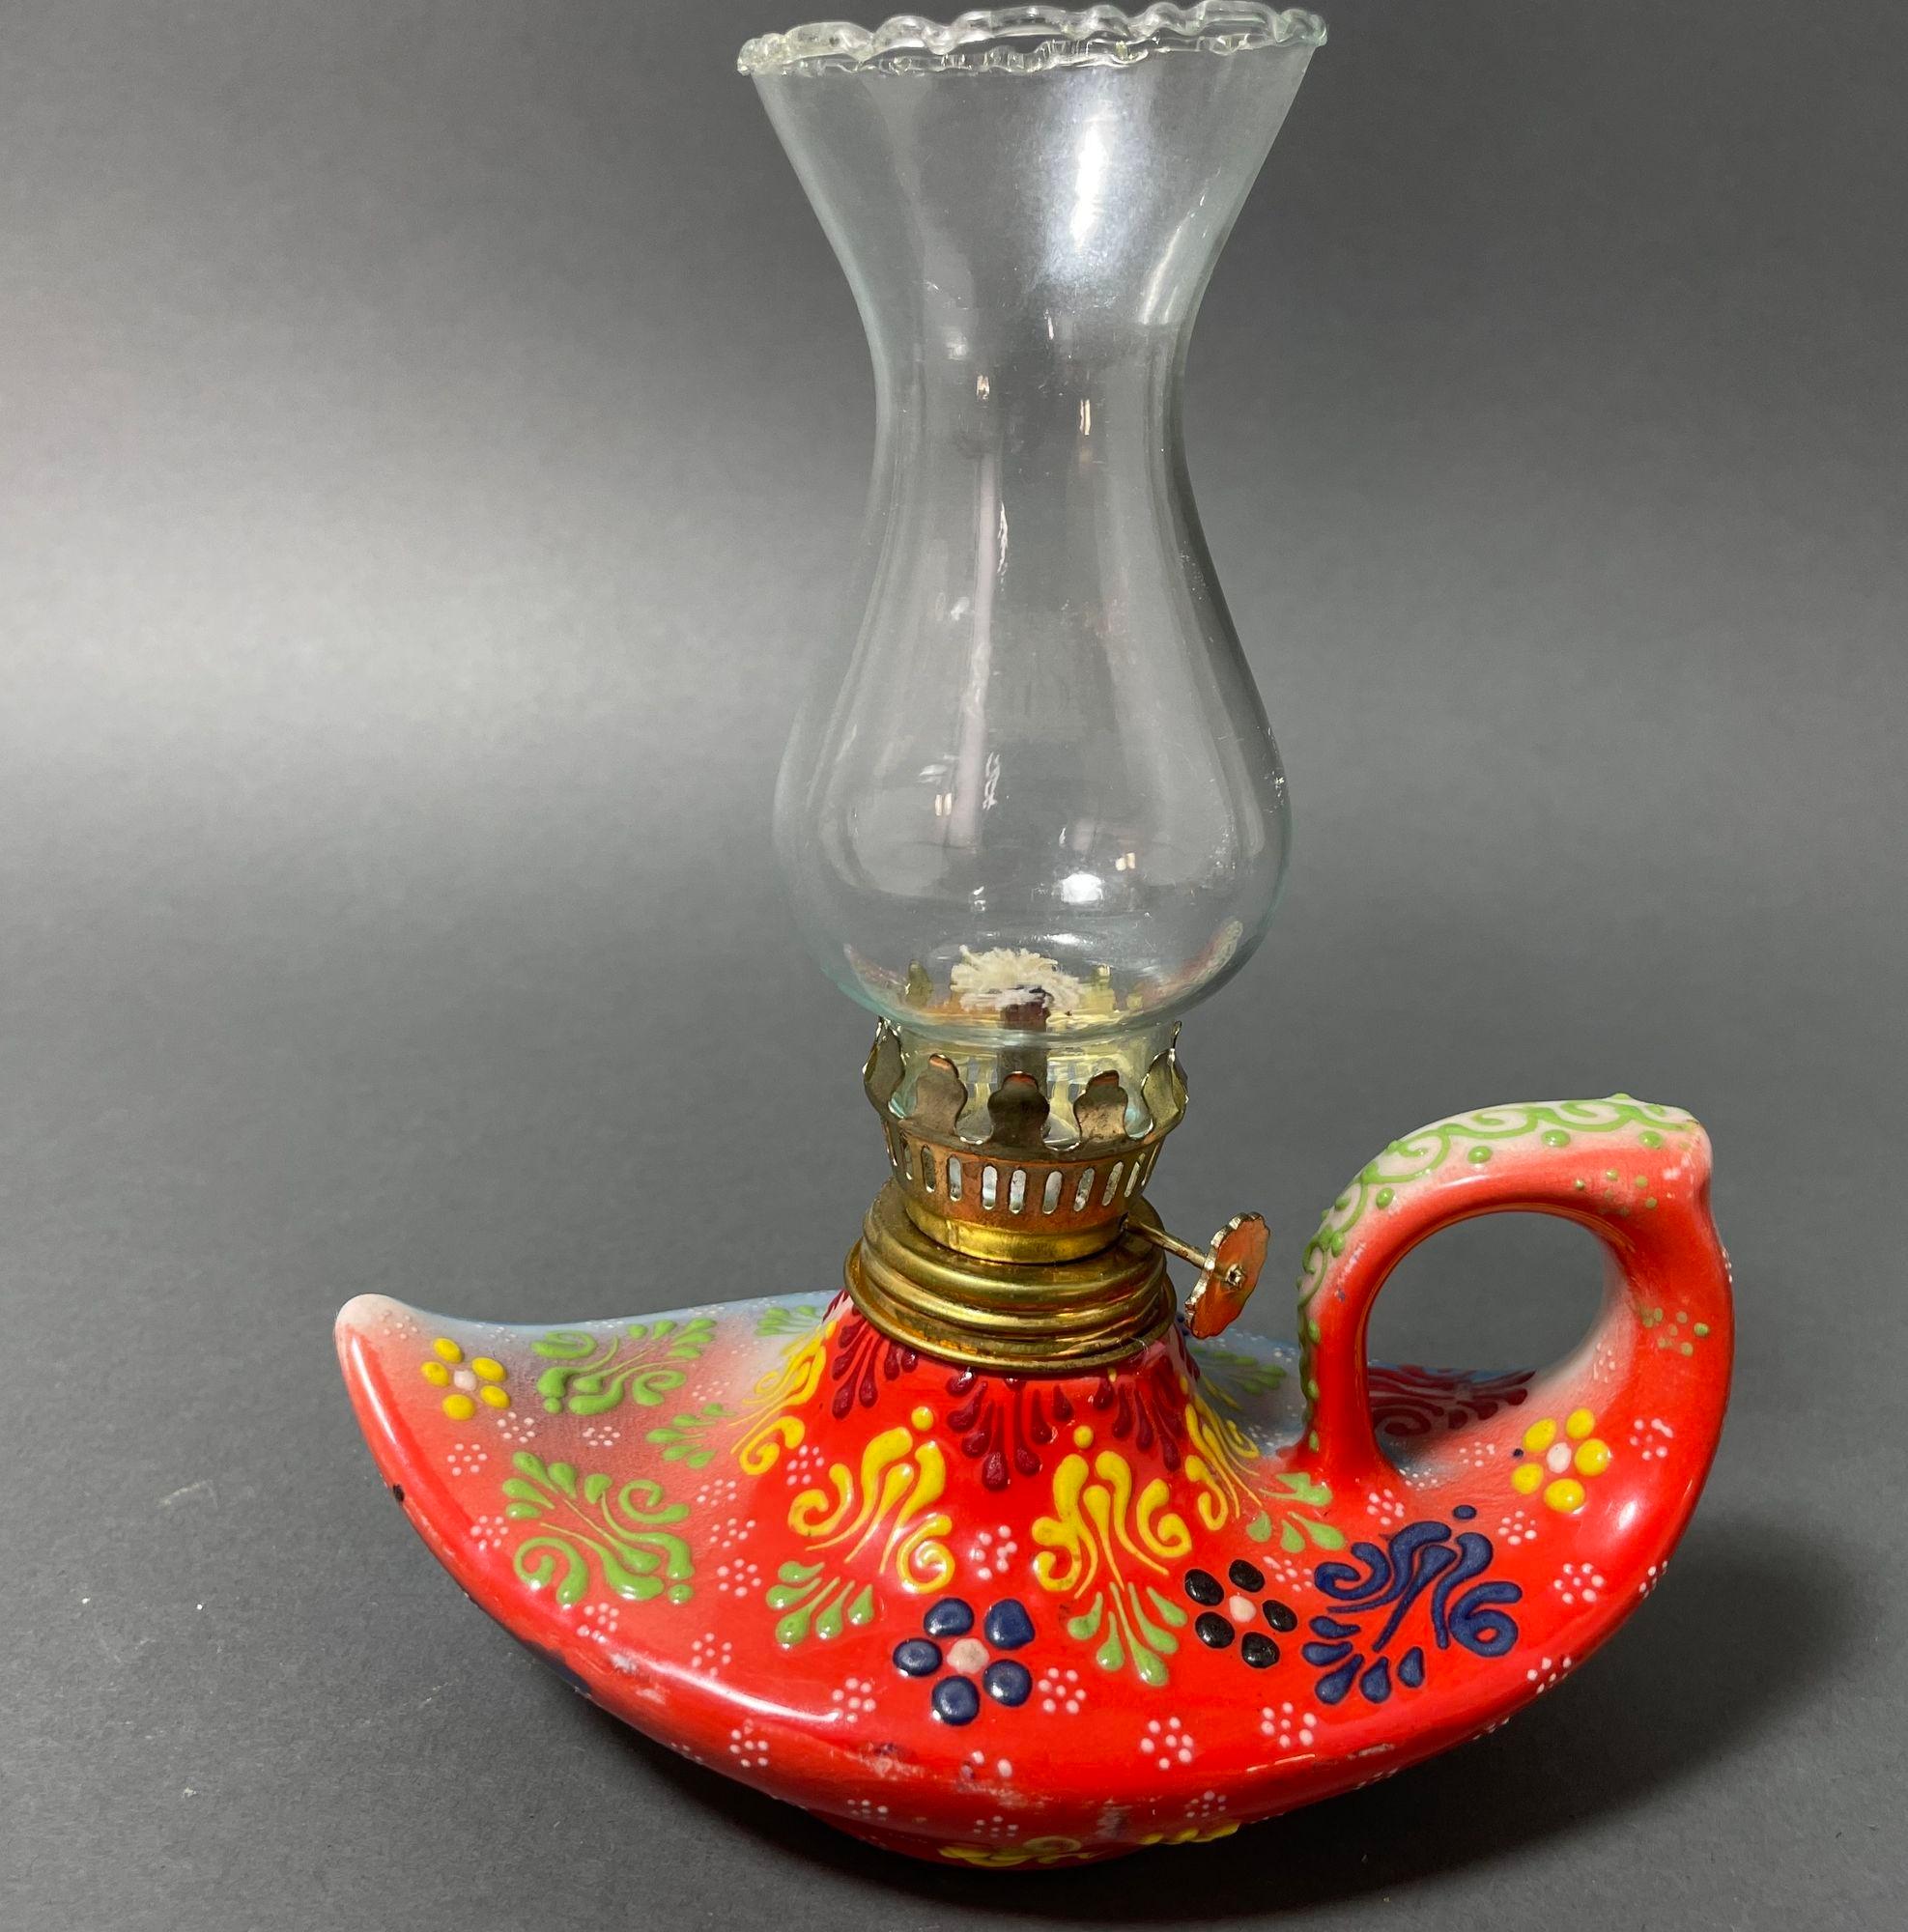 Aladdin style handmade red ceramic Turkish oil lamp In Good Condition For Sale In North Hollywood, CA